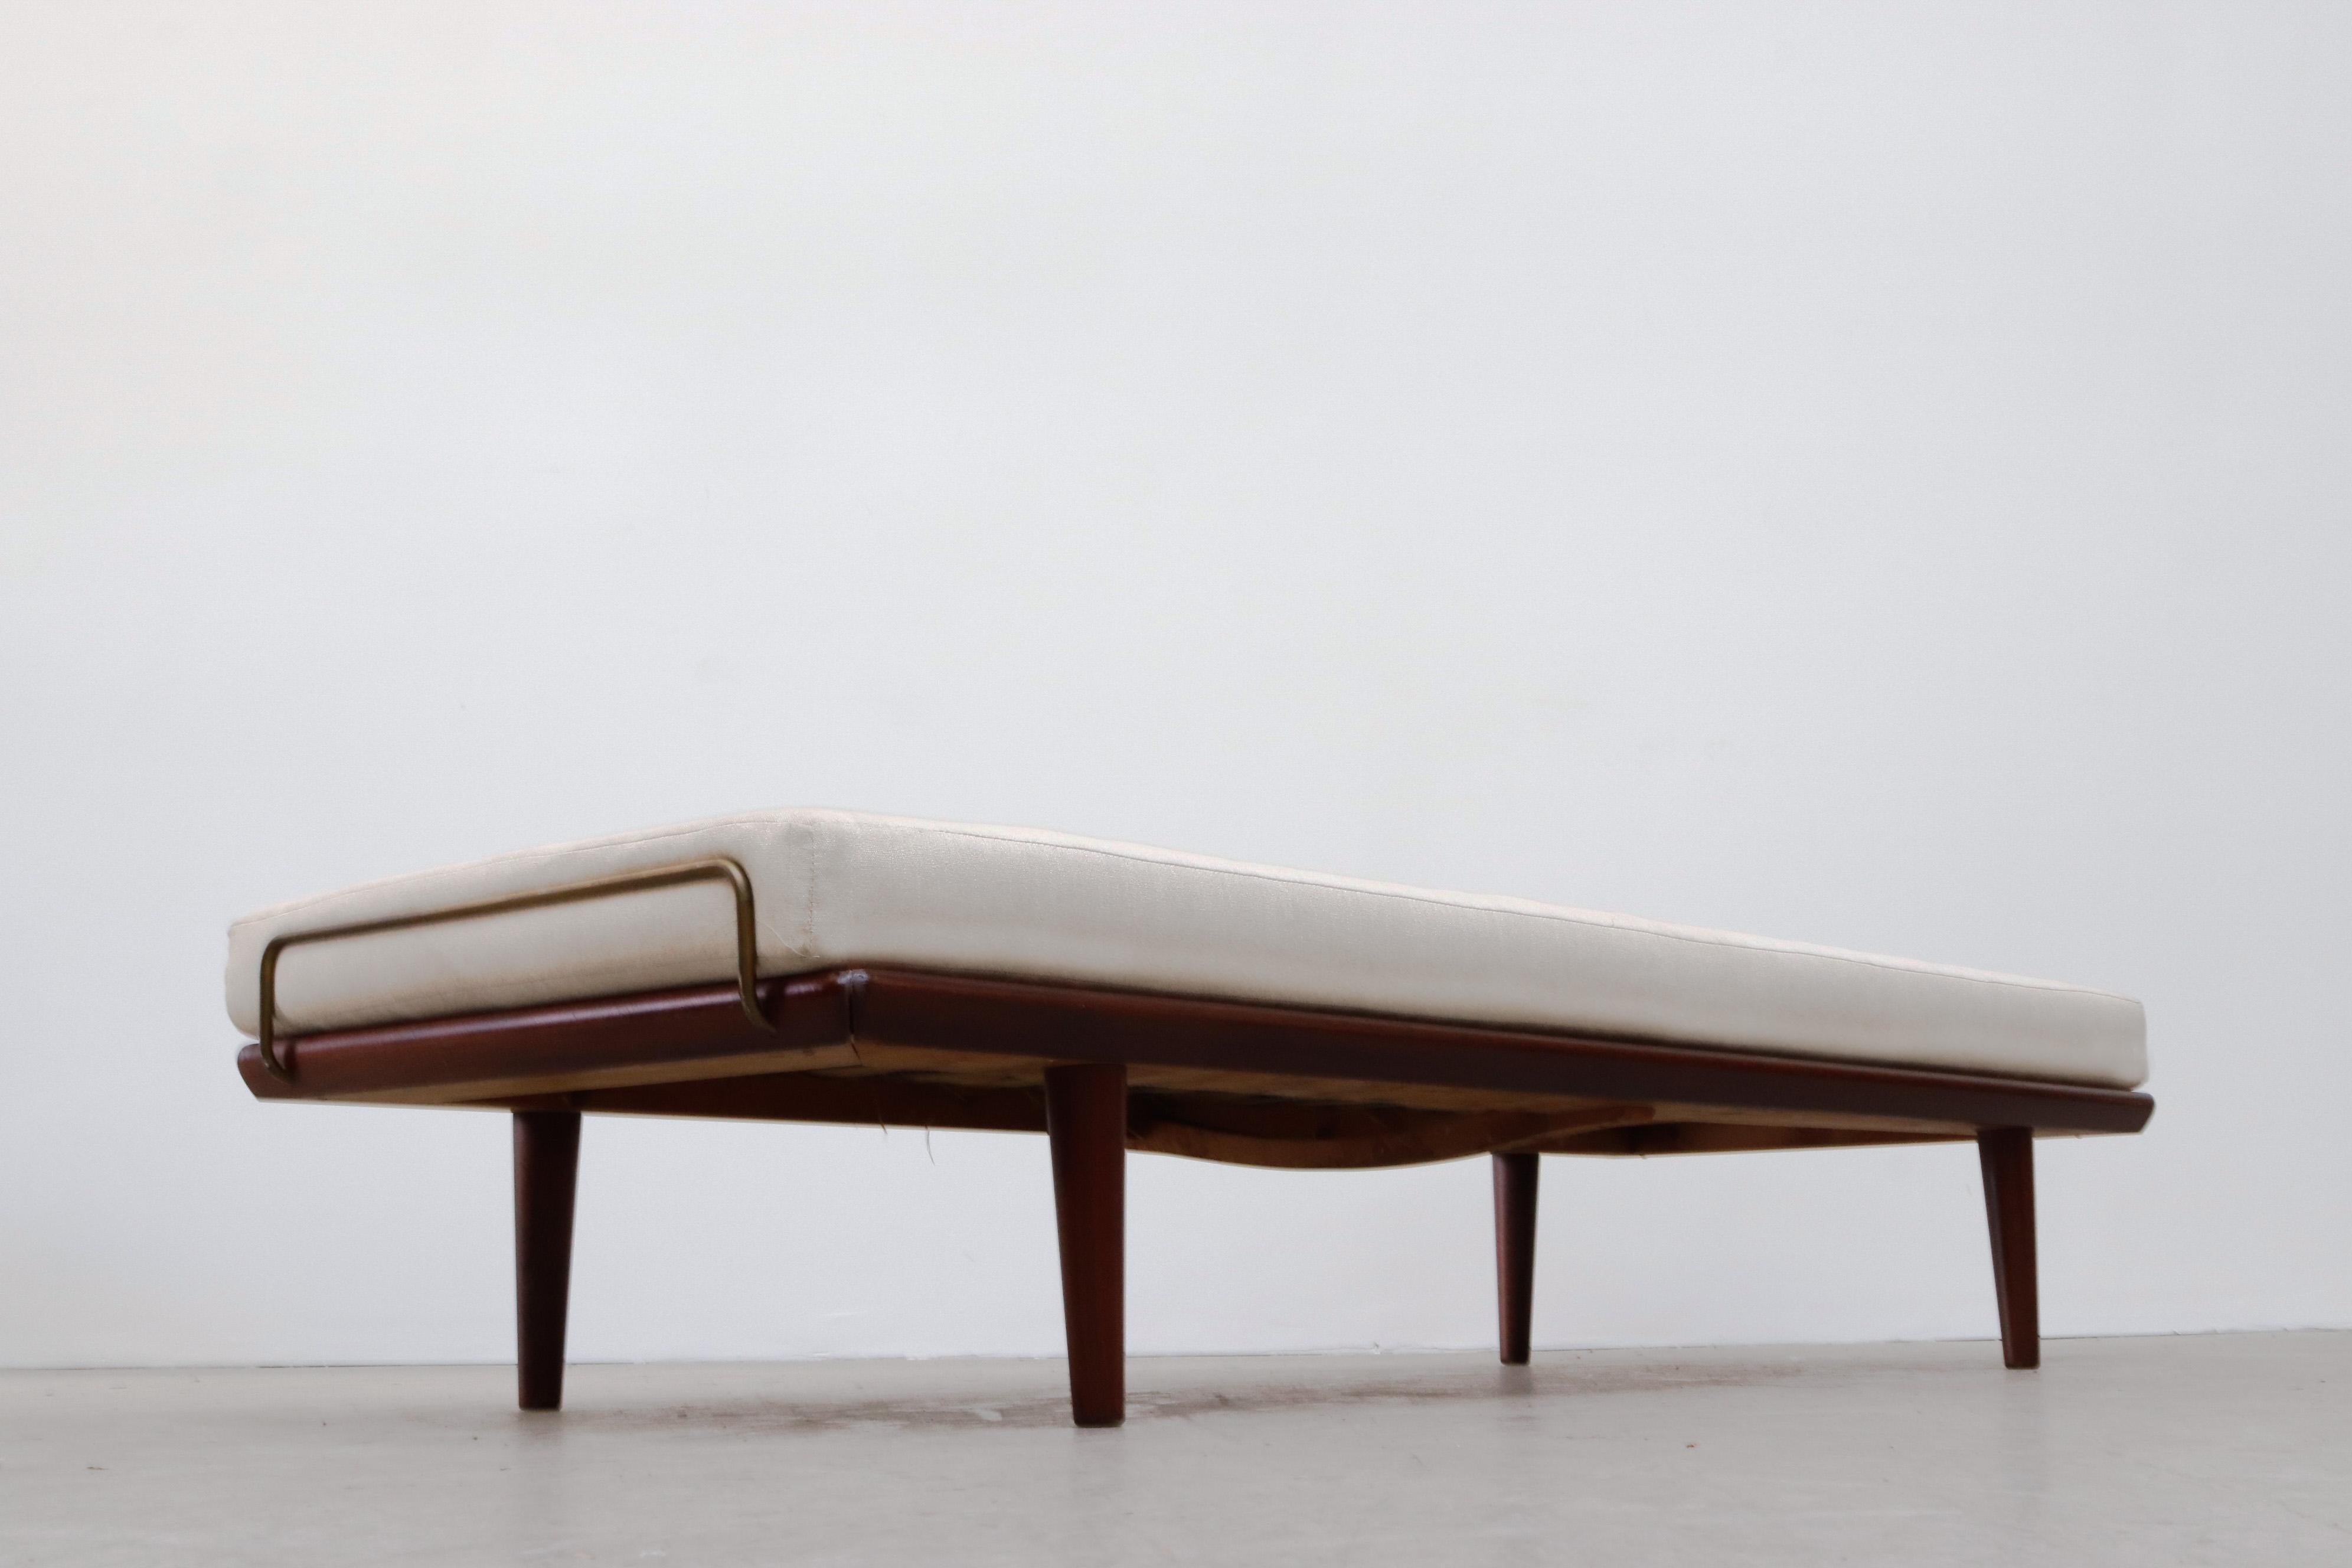 Mid-century Hans Wegner daybed with teak frame, tapered legs and brass end rail accents. In original condition with visible wear and patina consistent with age and use.